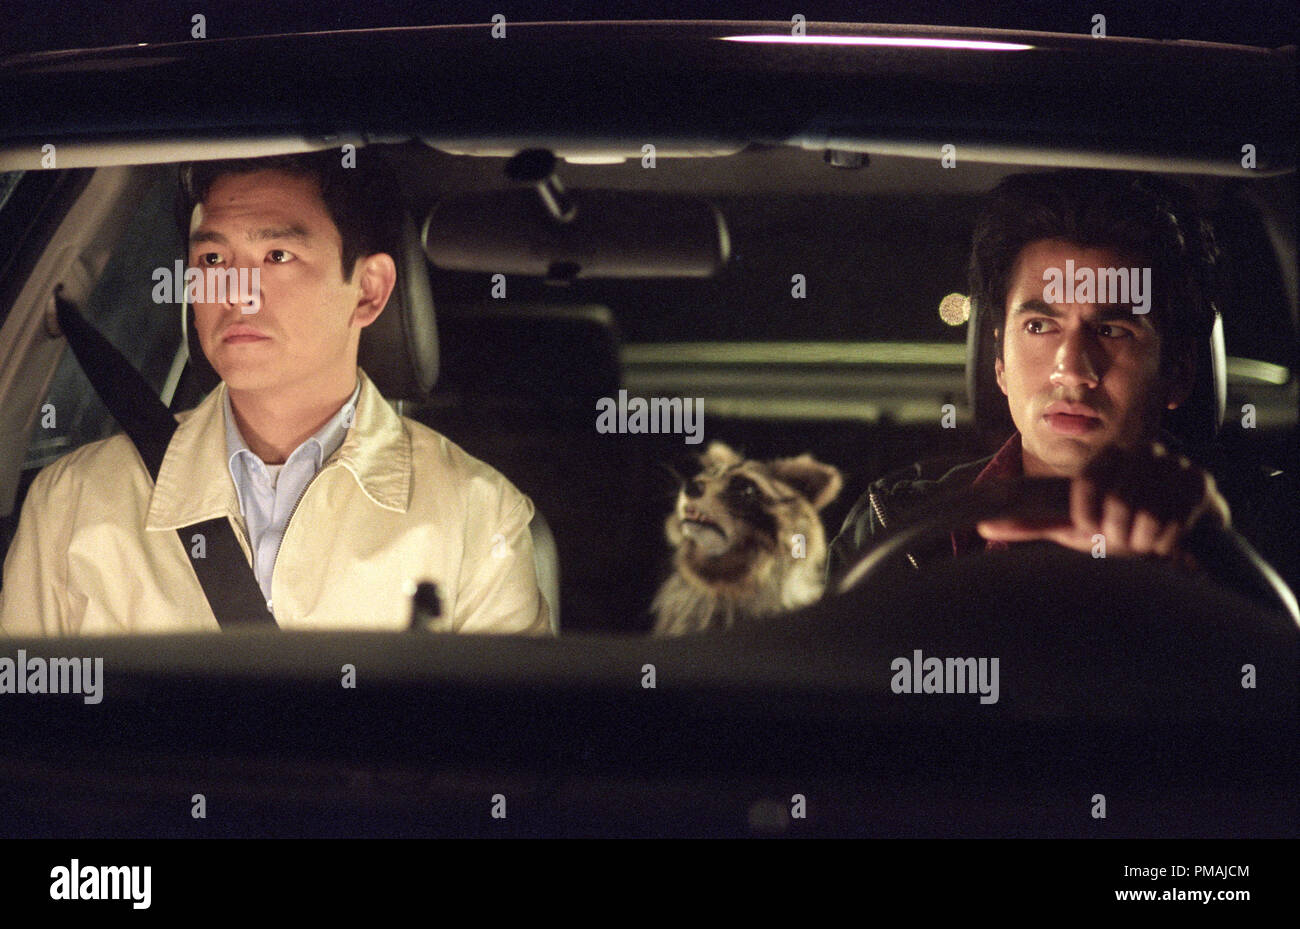 Harold (John Cho, left) and Kumar (Kal Penn, right) sense they have an unexpected passenger in New Line Cinema's comedy, Harold and Kumar Go To White Castle. (2004) Stock Photo